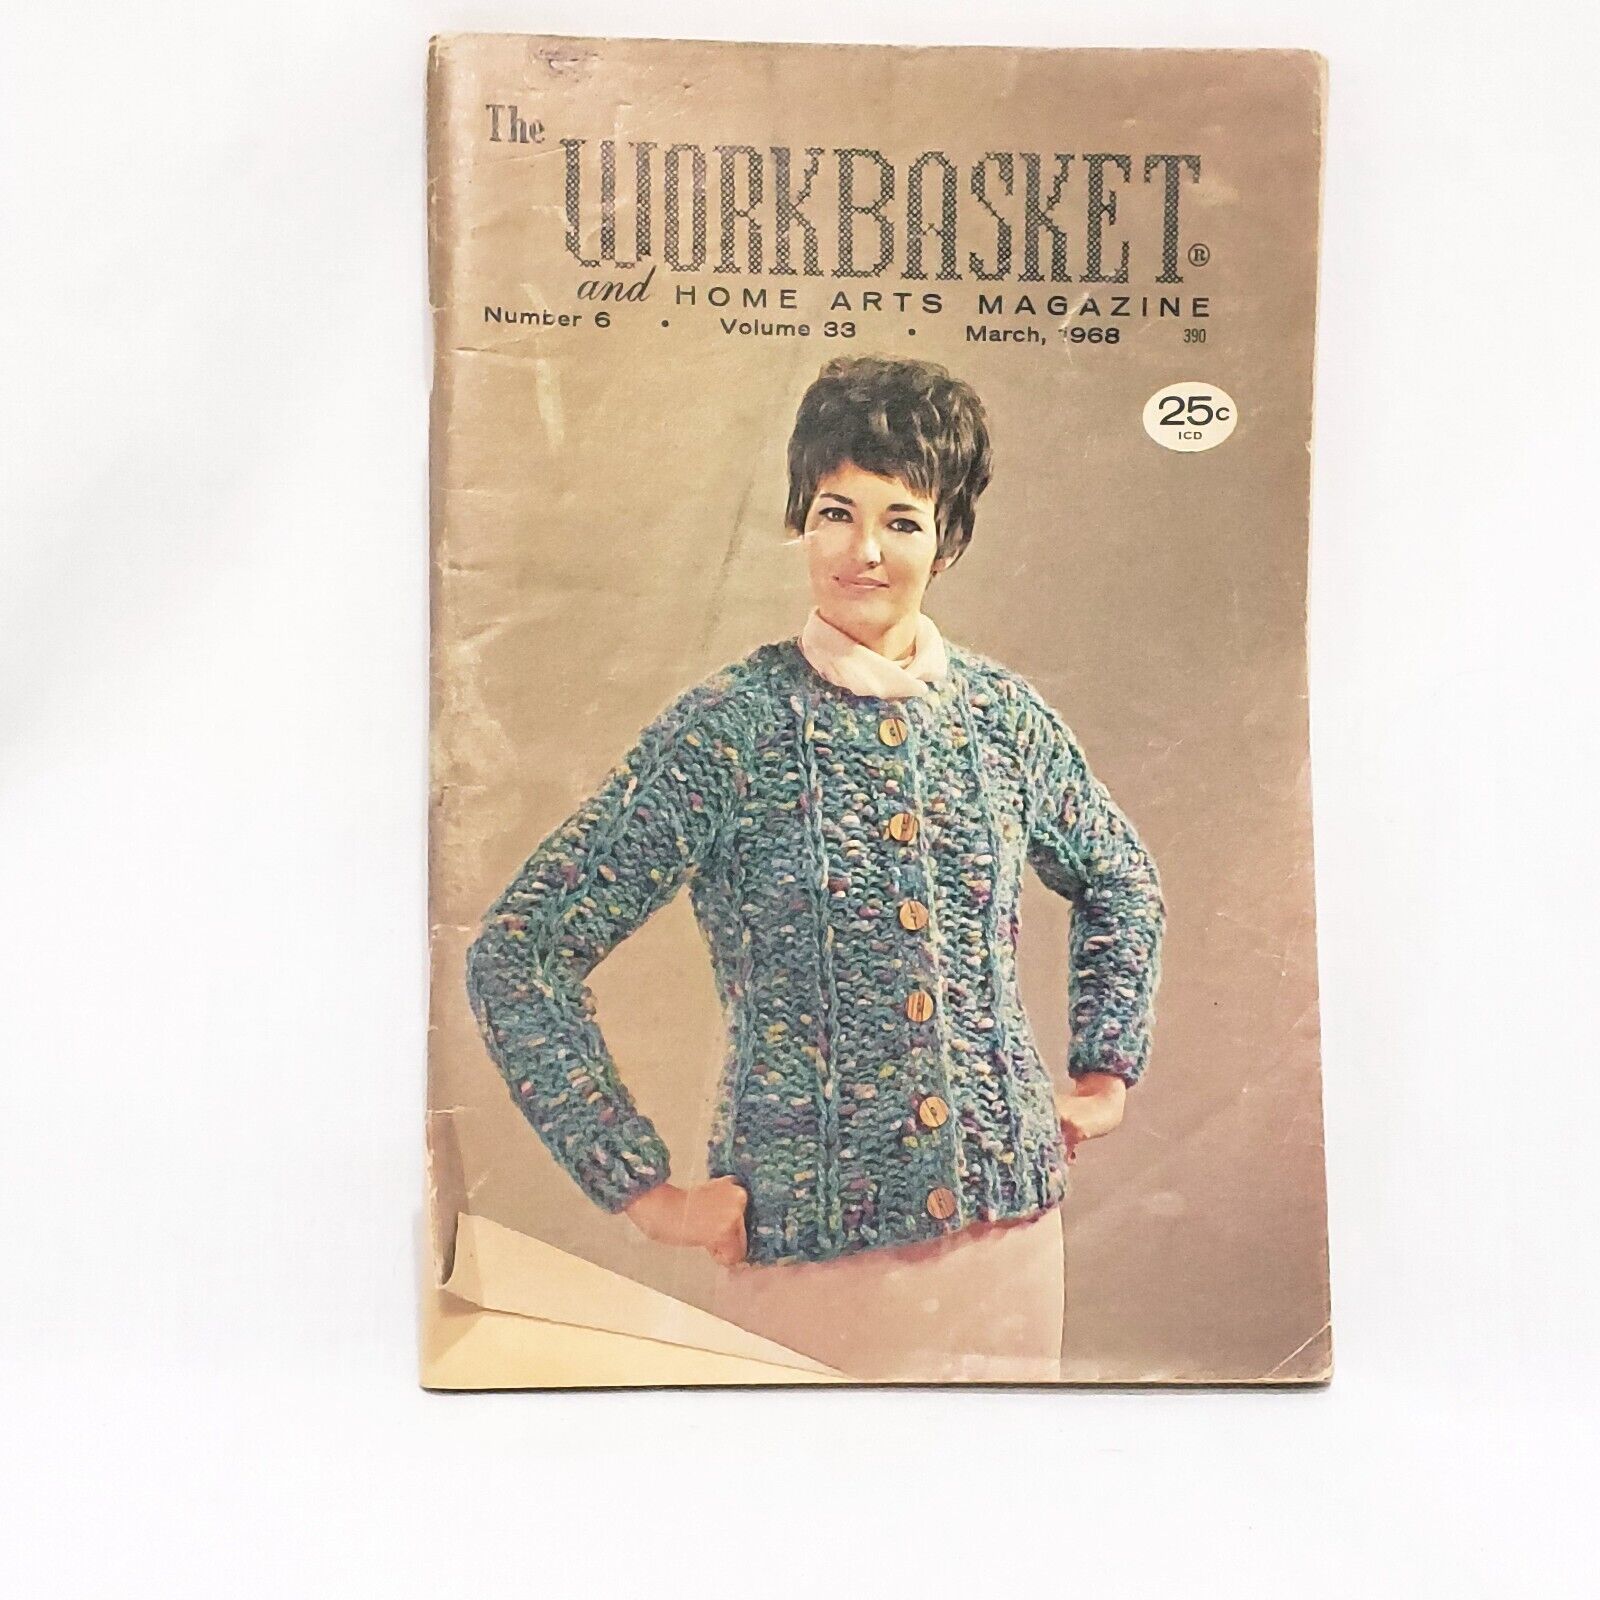 The Workbasket and Home Arts Magazine March 1968 Crochet Knitting Patterns - $12.43